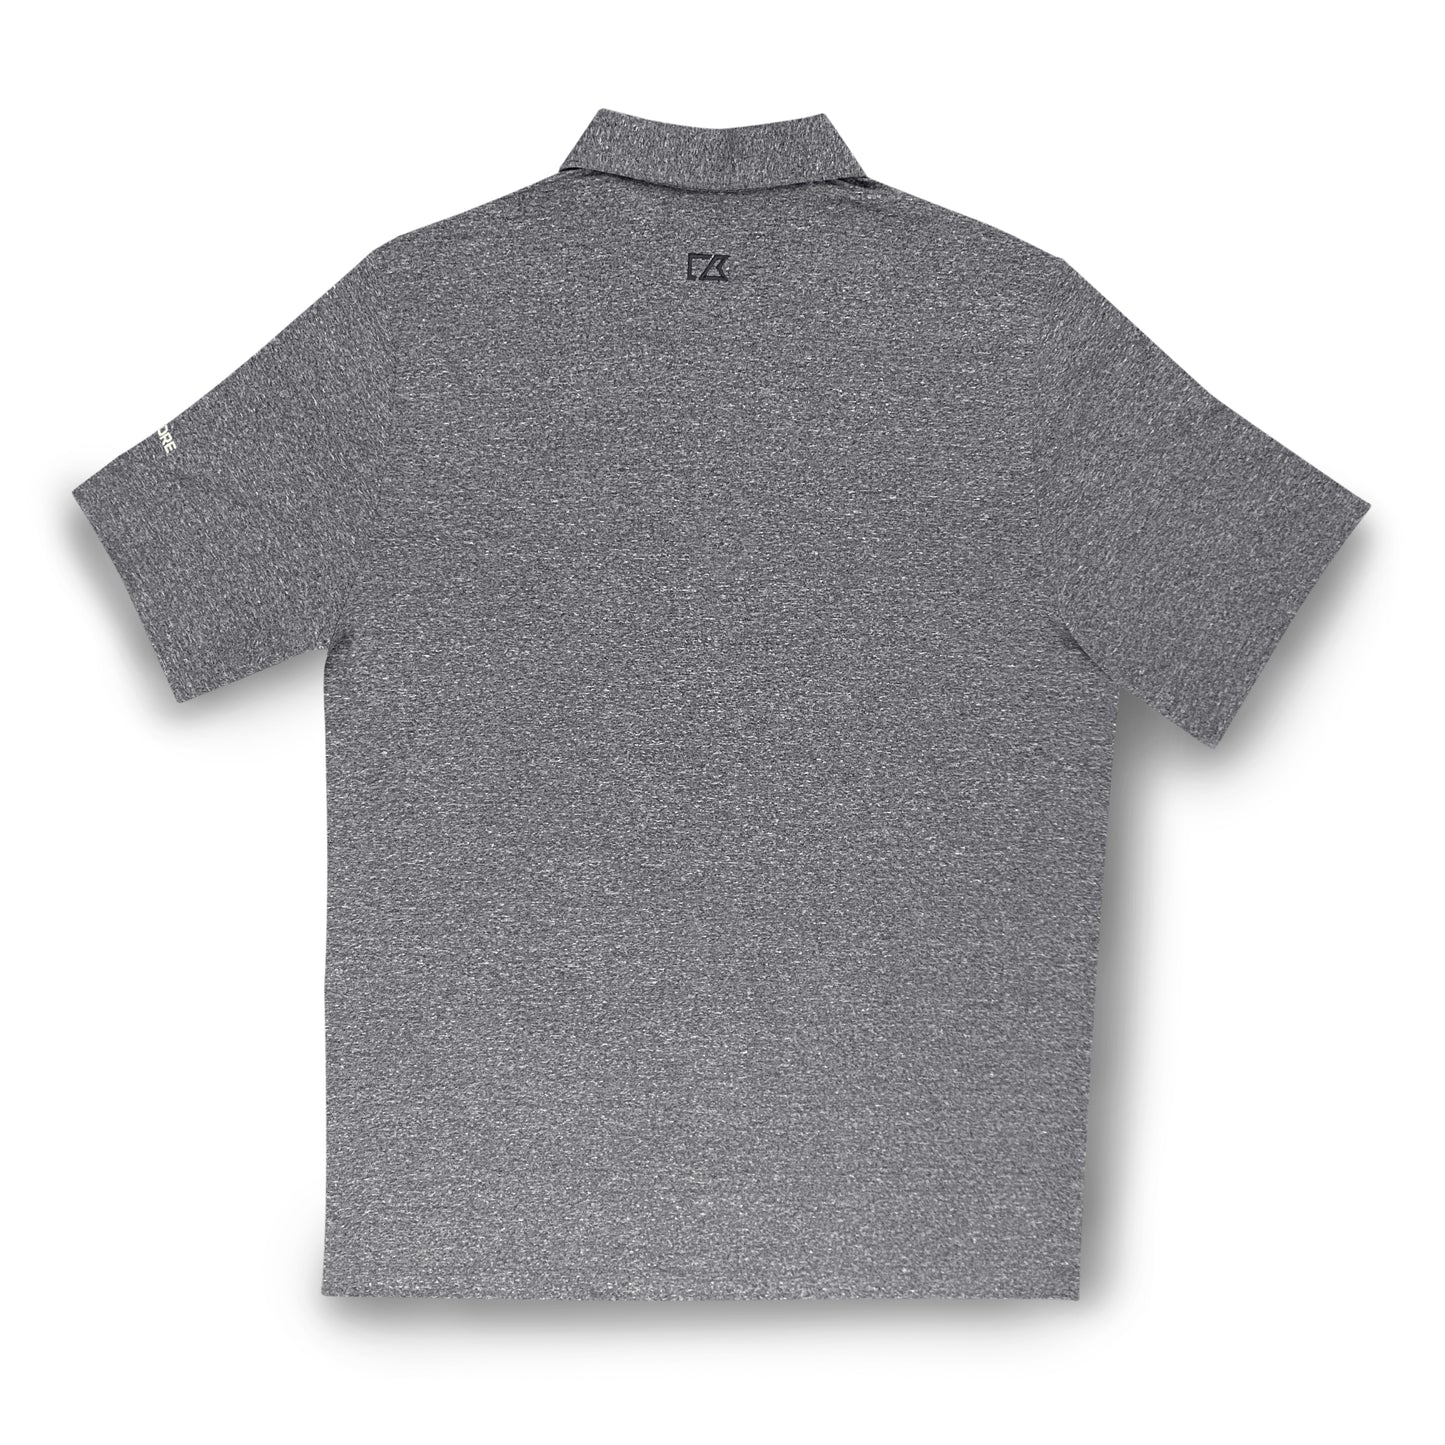 Cutter & Buck Forge Heathered Polo - Charcoal Heather